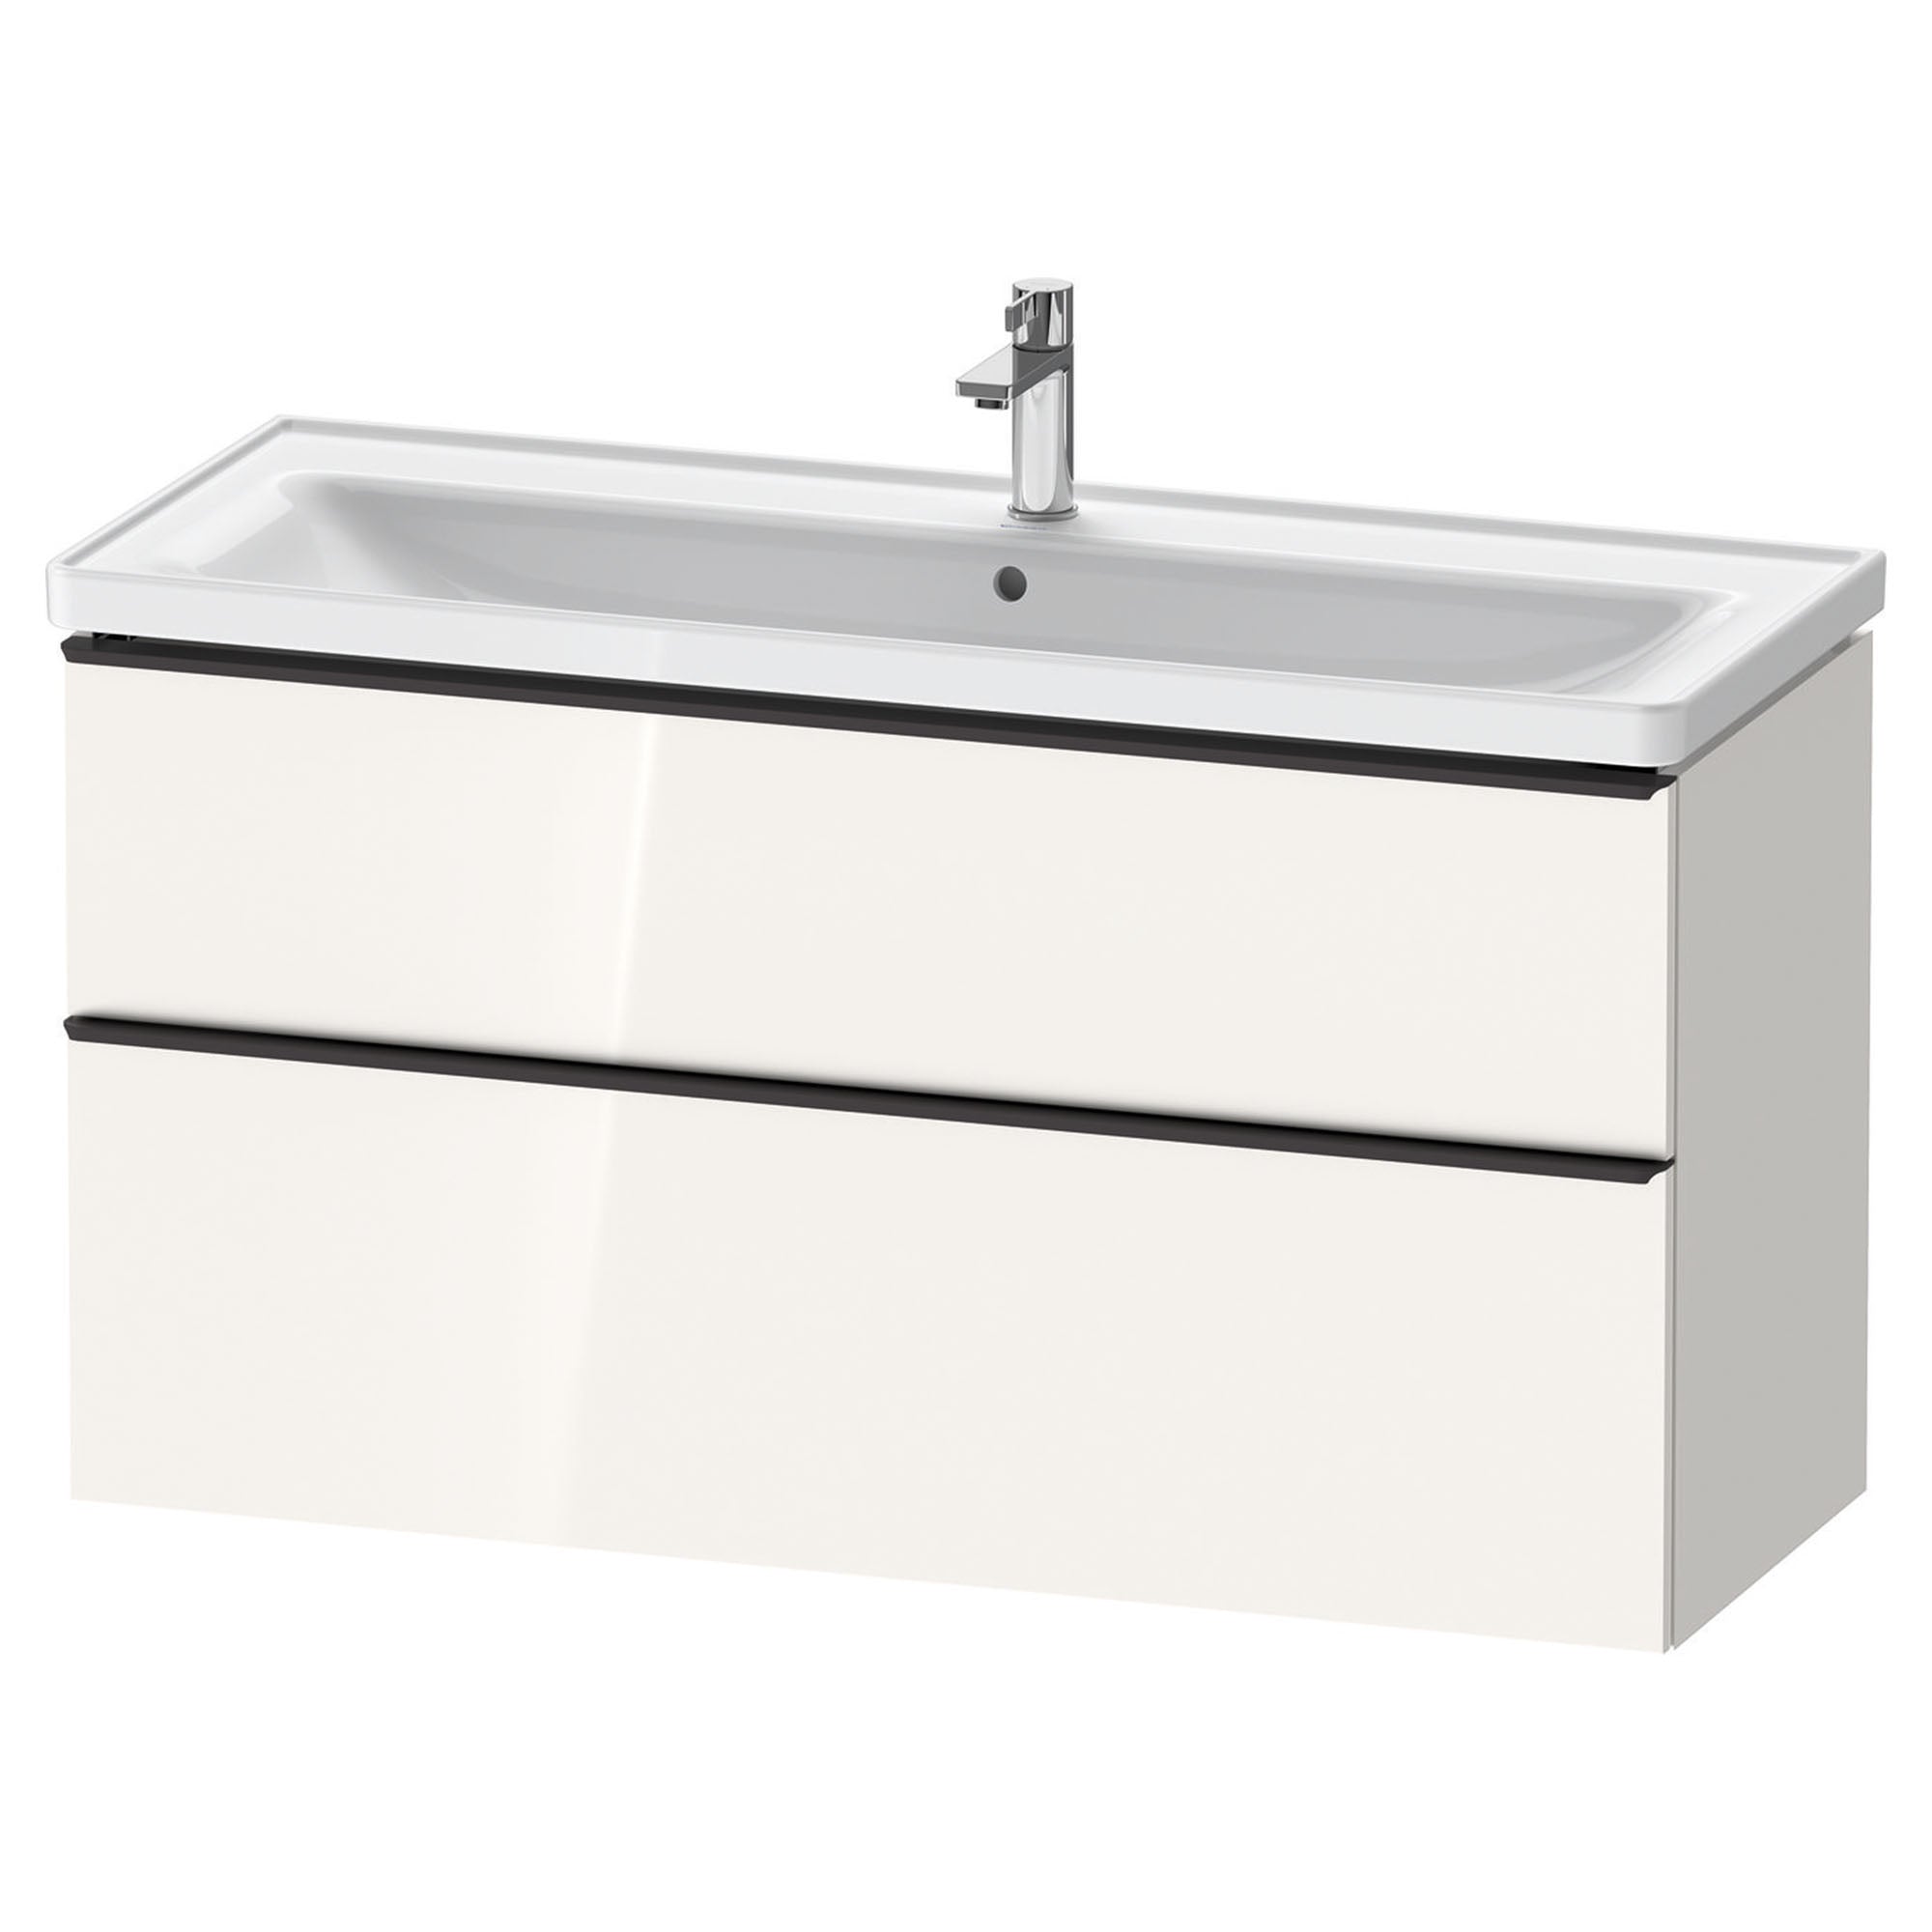 duravit d-neo 1200mm wall mounted vanity unit with d-neo basin gloss white diamond black handles